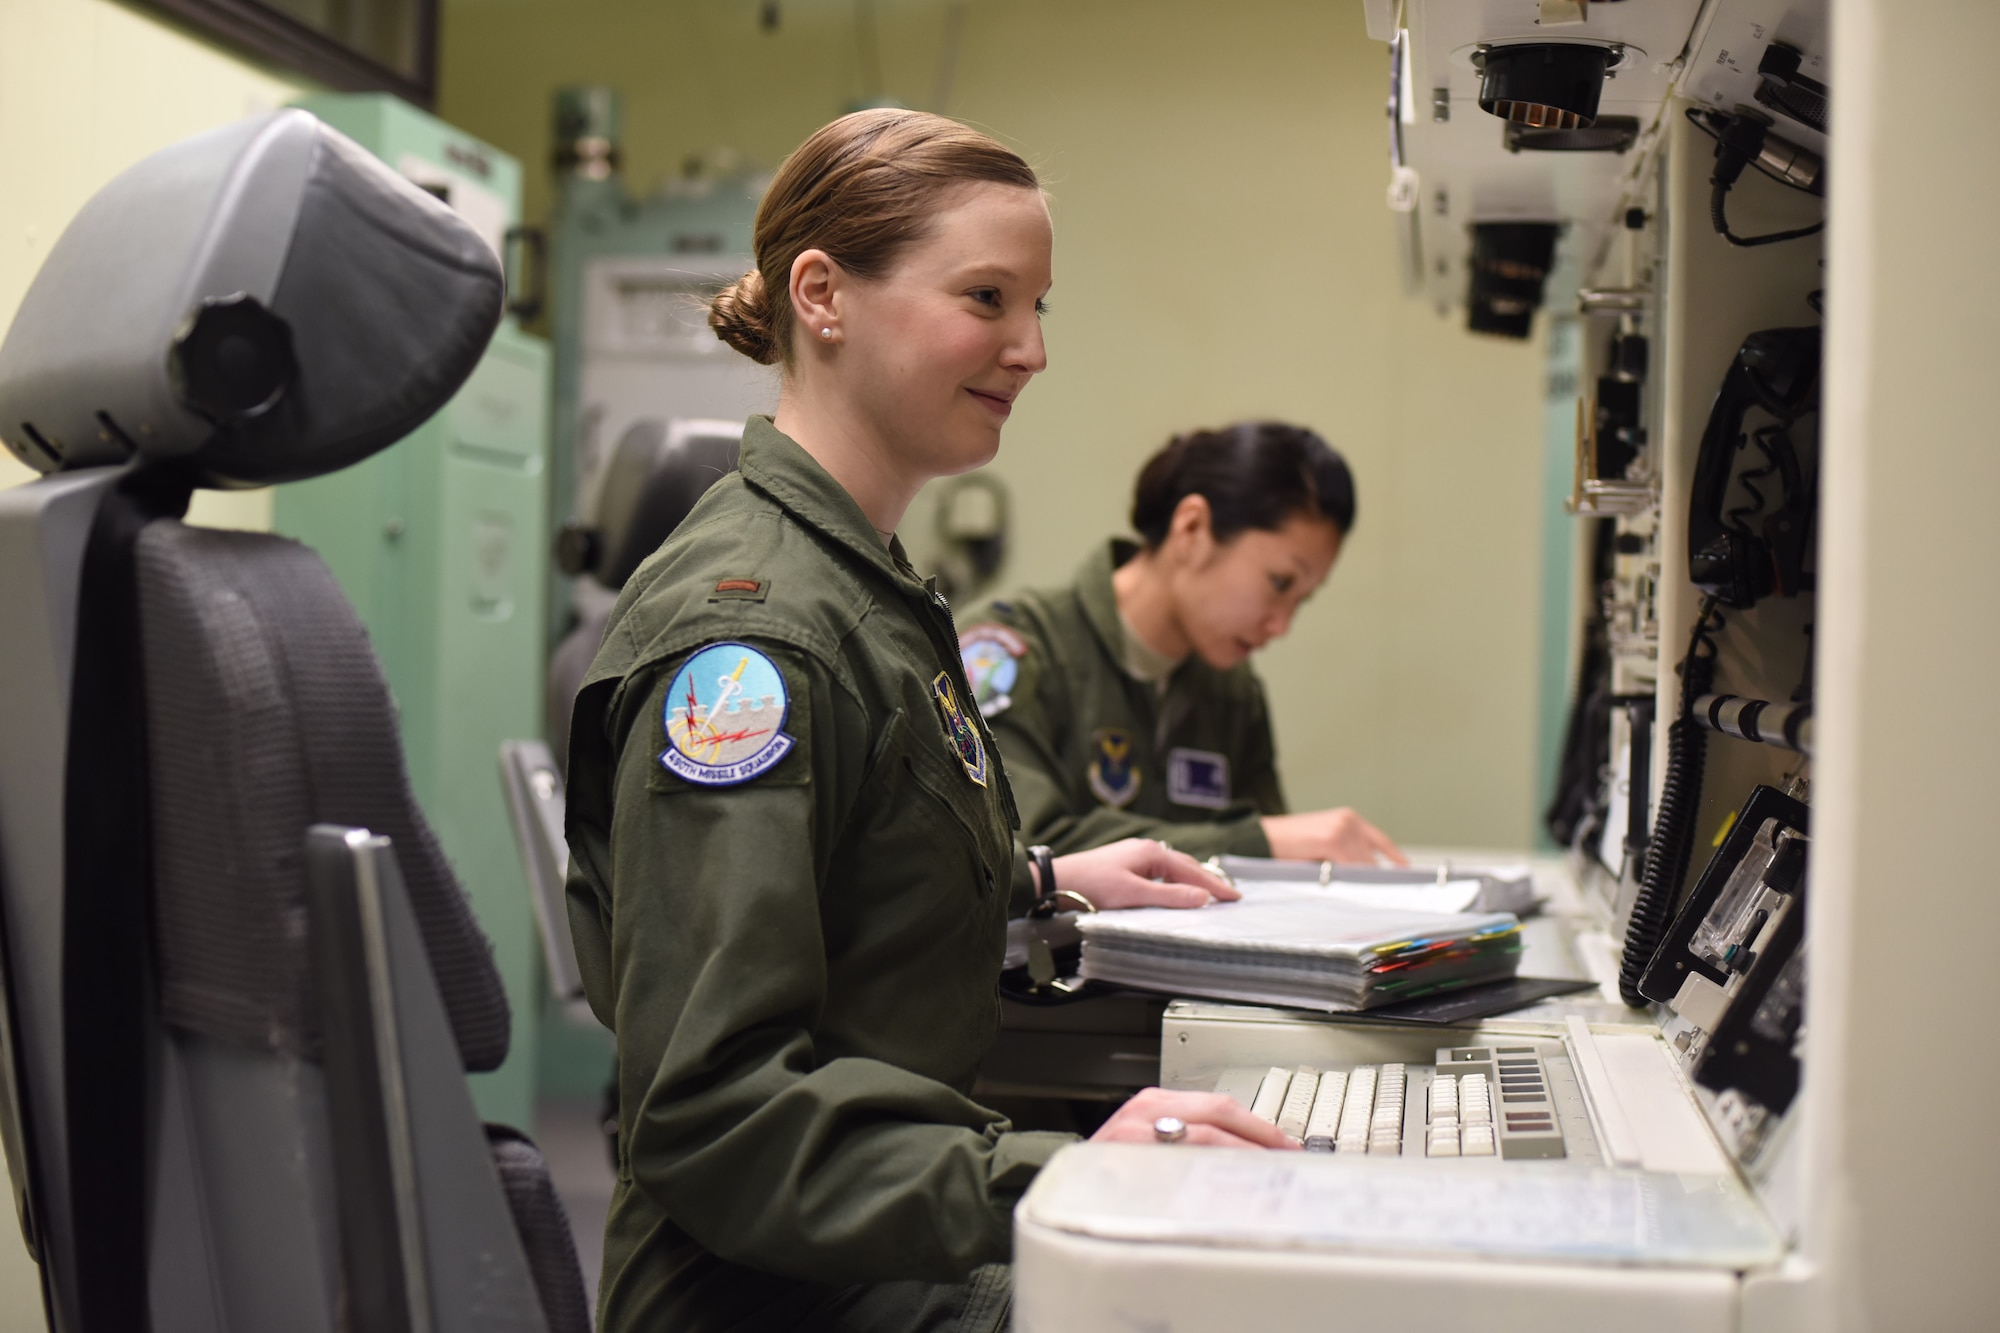 2nd Lt. Alexandra Rea, 490th Missile Squadron ICBM combat crew deputy director, left, and 1st Lt. Elizabeth Guidara, 12th Missile Squadron combat crew deputy director, perform training at the Malmstrom Air Force Base, Mont. Building 500 Missile Procedures Trainer March, 21, 2016. In honor of Women’s History Month, 90 female missileers based out of Minot Air Force Base, North Dakota, F.E. Warren AFB, Wyoming and Malmstrom AFB, Montana, will complete a 24-hour alert. In addition, B-52 aircrews from Minot and Barksdale AFB, Louisiana will participate by fielding all-female flight crews. (U.S. Air Force photo/Airman Collin Schmidt) 